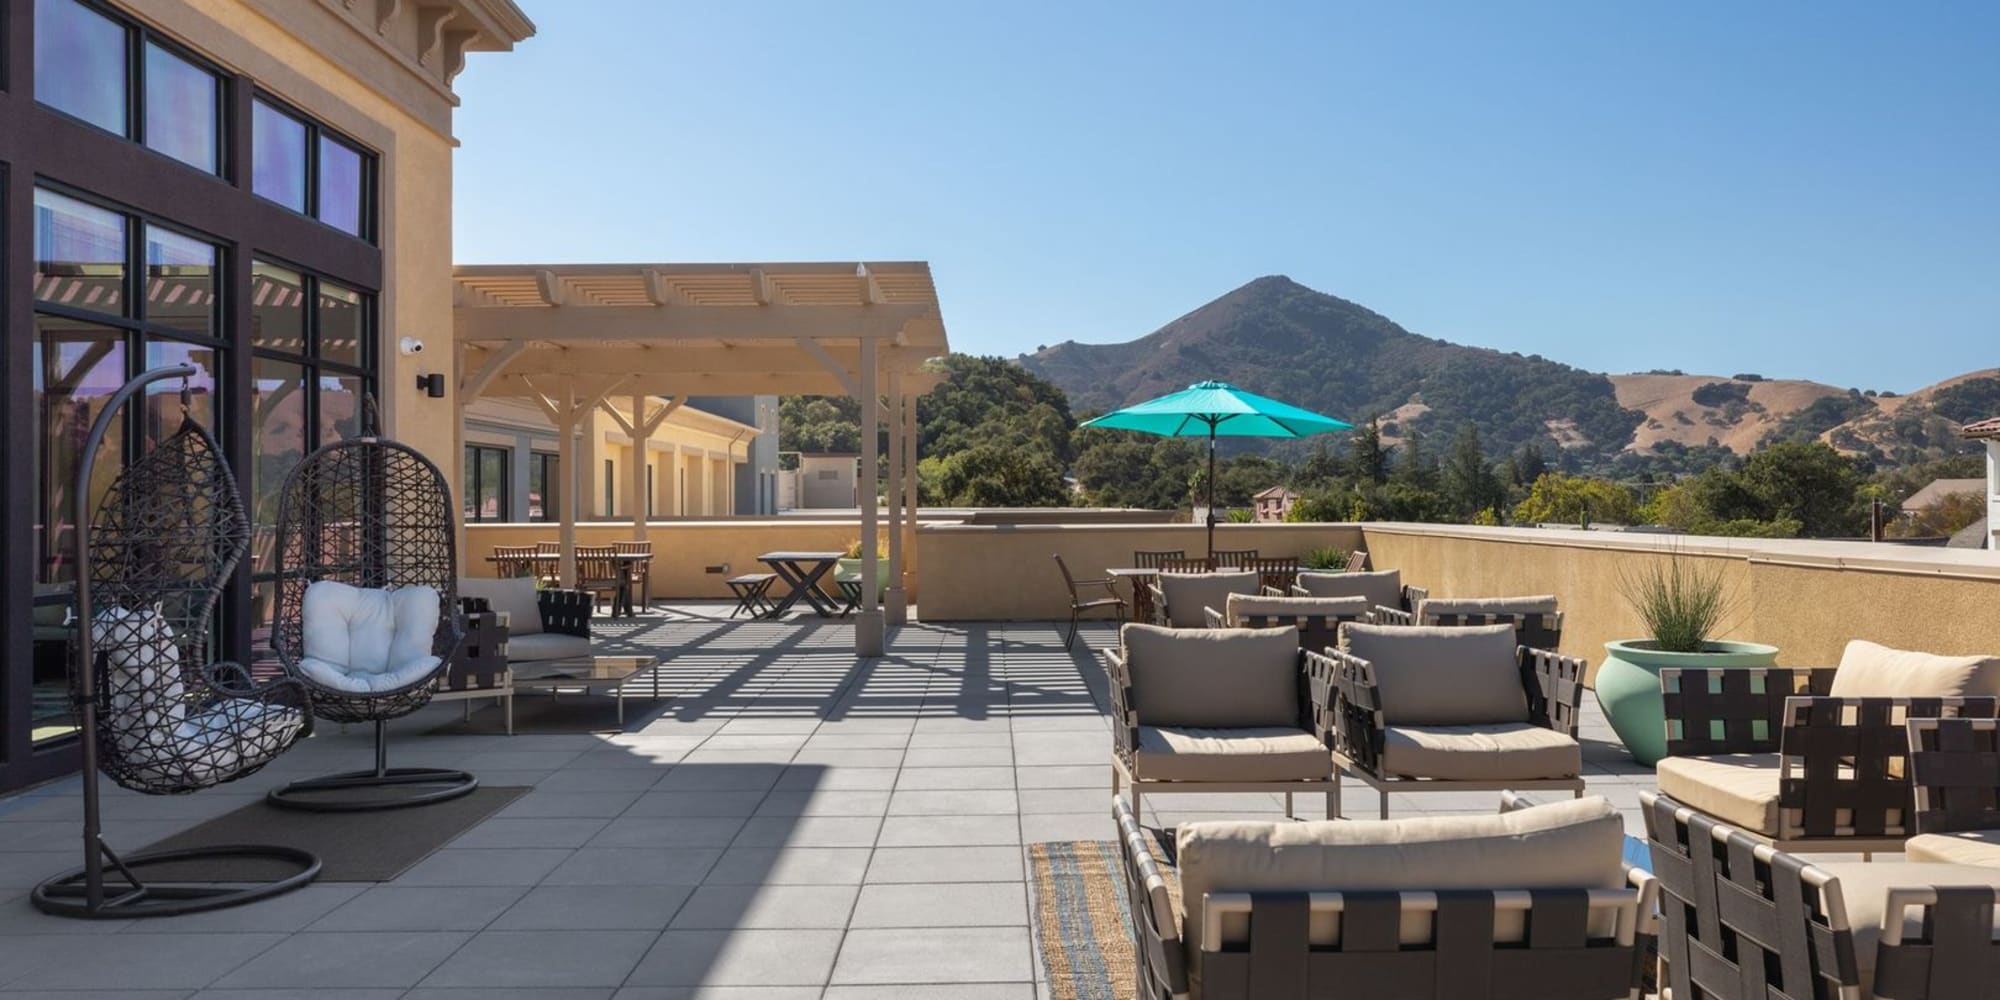 Outdoor common area at Sunsweet Apartments in Morgan Hill, California